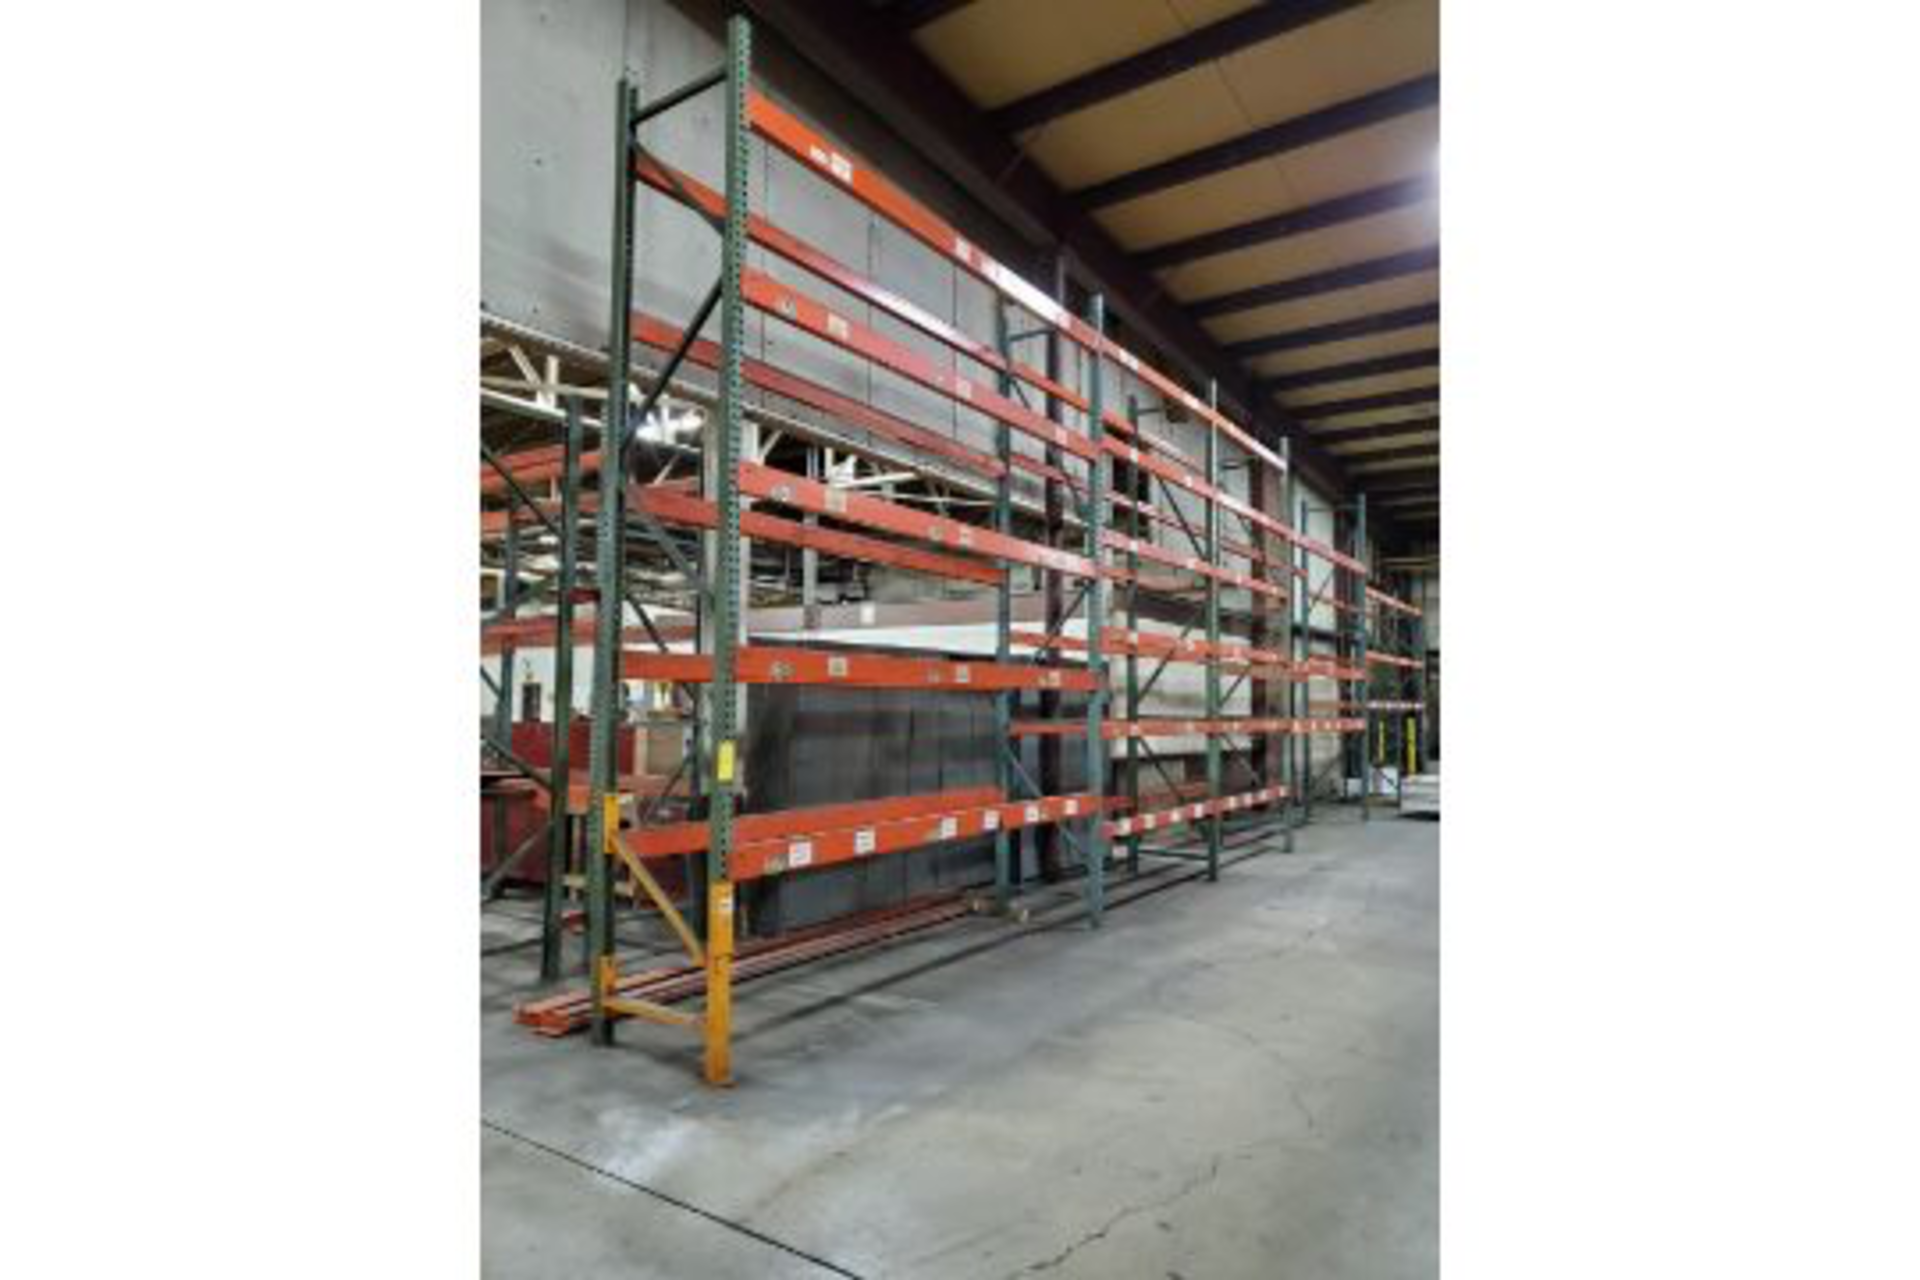 (8) SECTIONS OF PALLET RACKING (APPROX. SIZES - (2) 16' X 12' X 3', (2) 16' X 8' X 3', (1) 12' X 12'